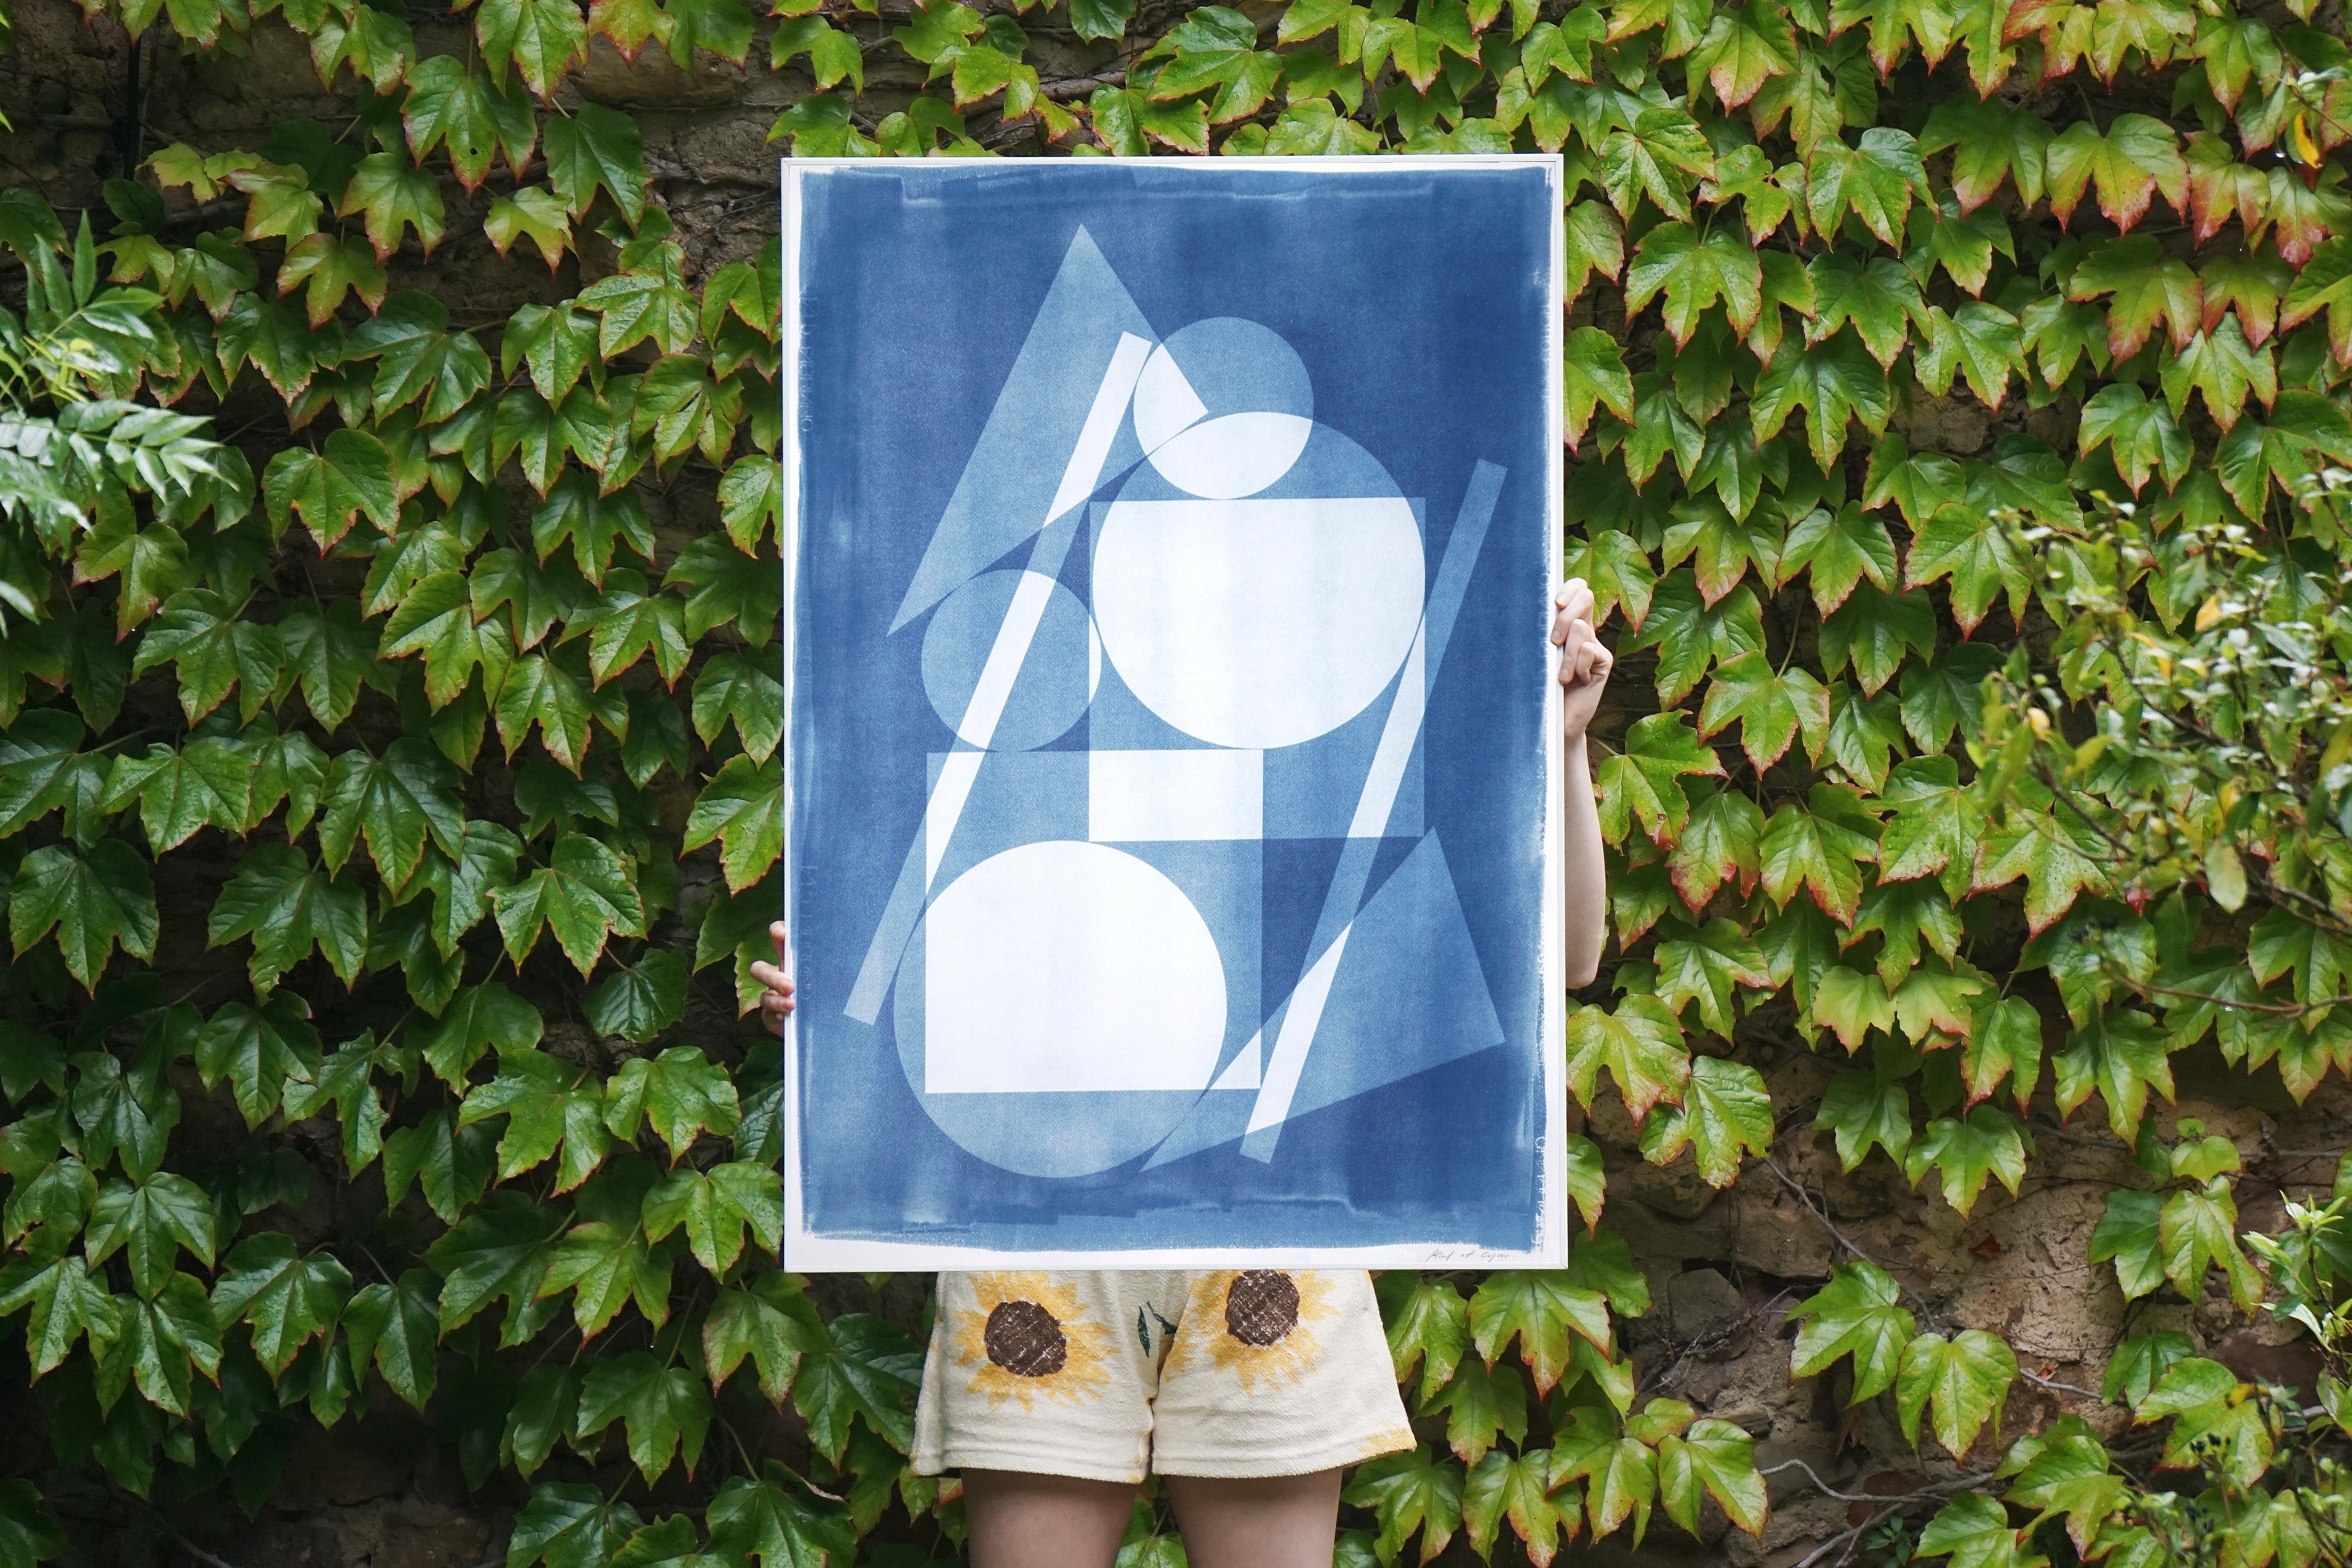 This is an exclusive handprinted unique cyanotype that takes its inspiration from the mid-century modern shapes.
It's made by layering paper cutouts and different exposures using uv-light. 

Details:
+ Title: Suprematist Stack
+ Year: 2022
+ Stamped